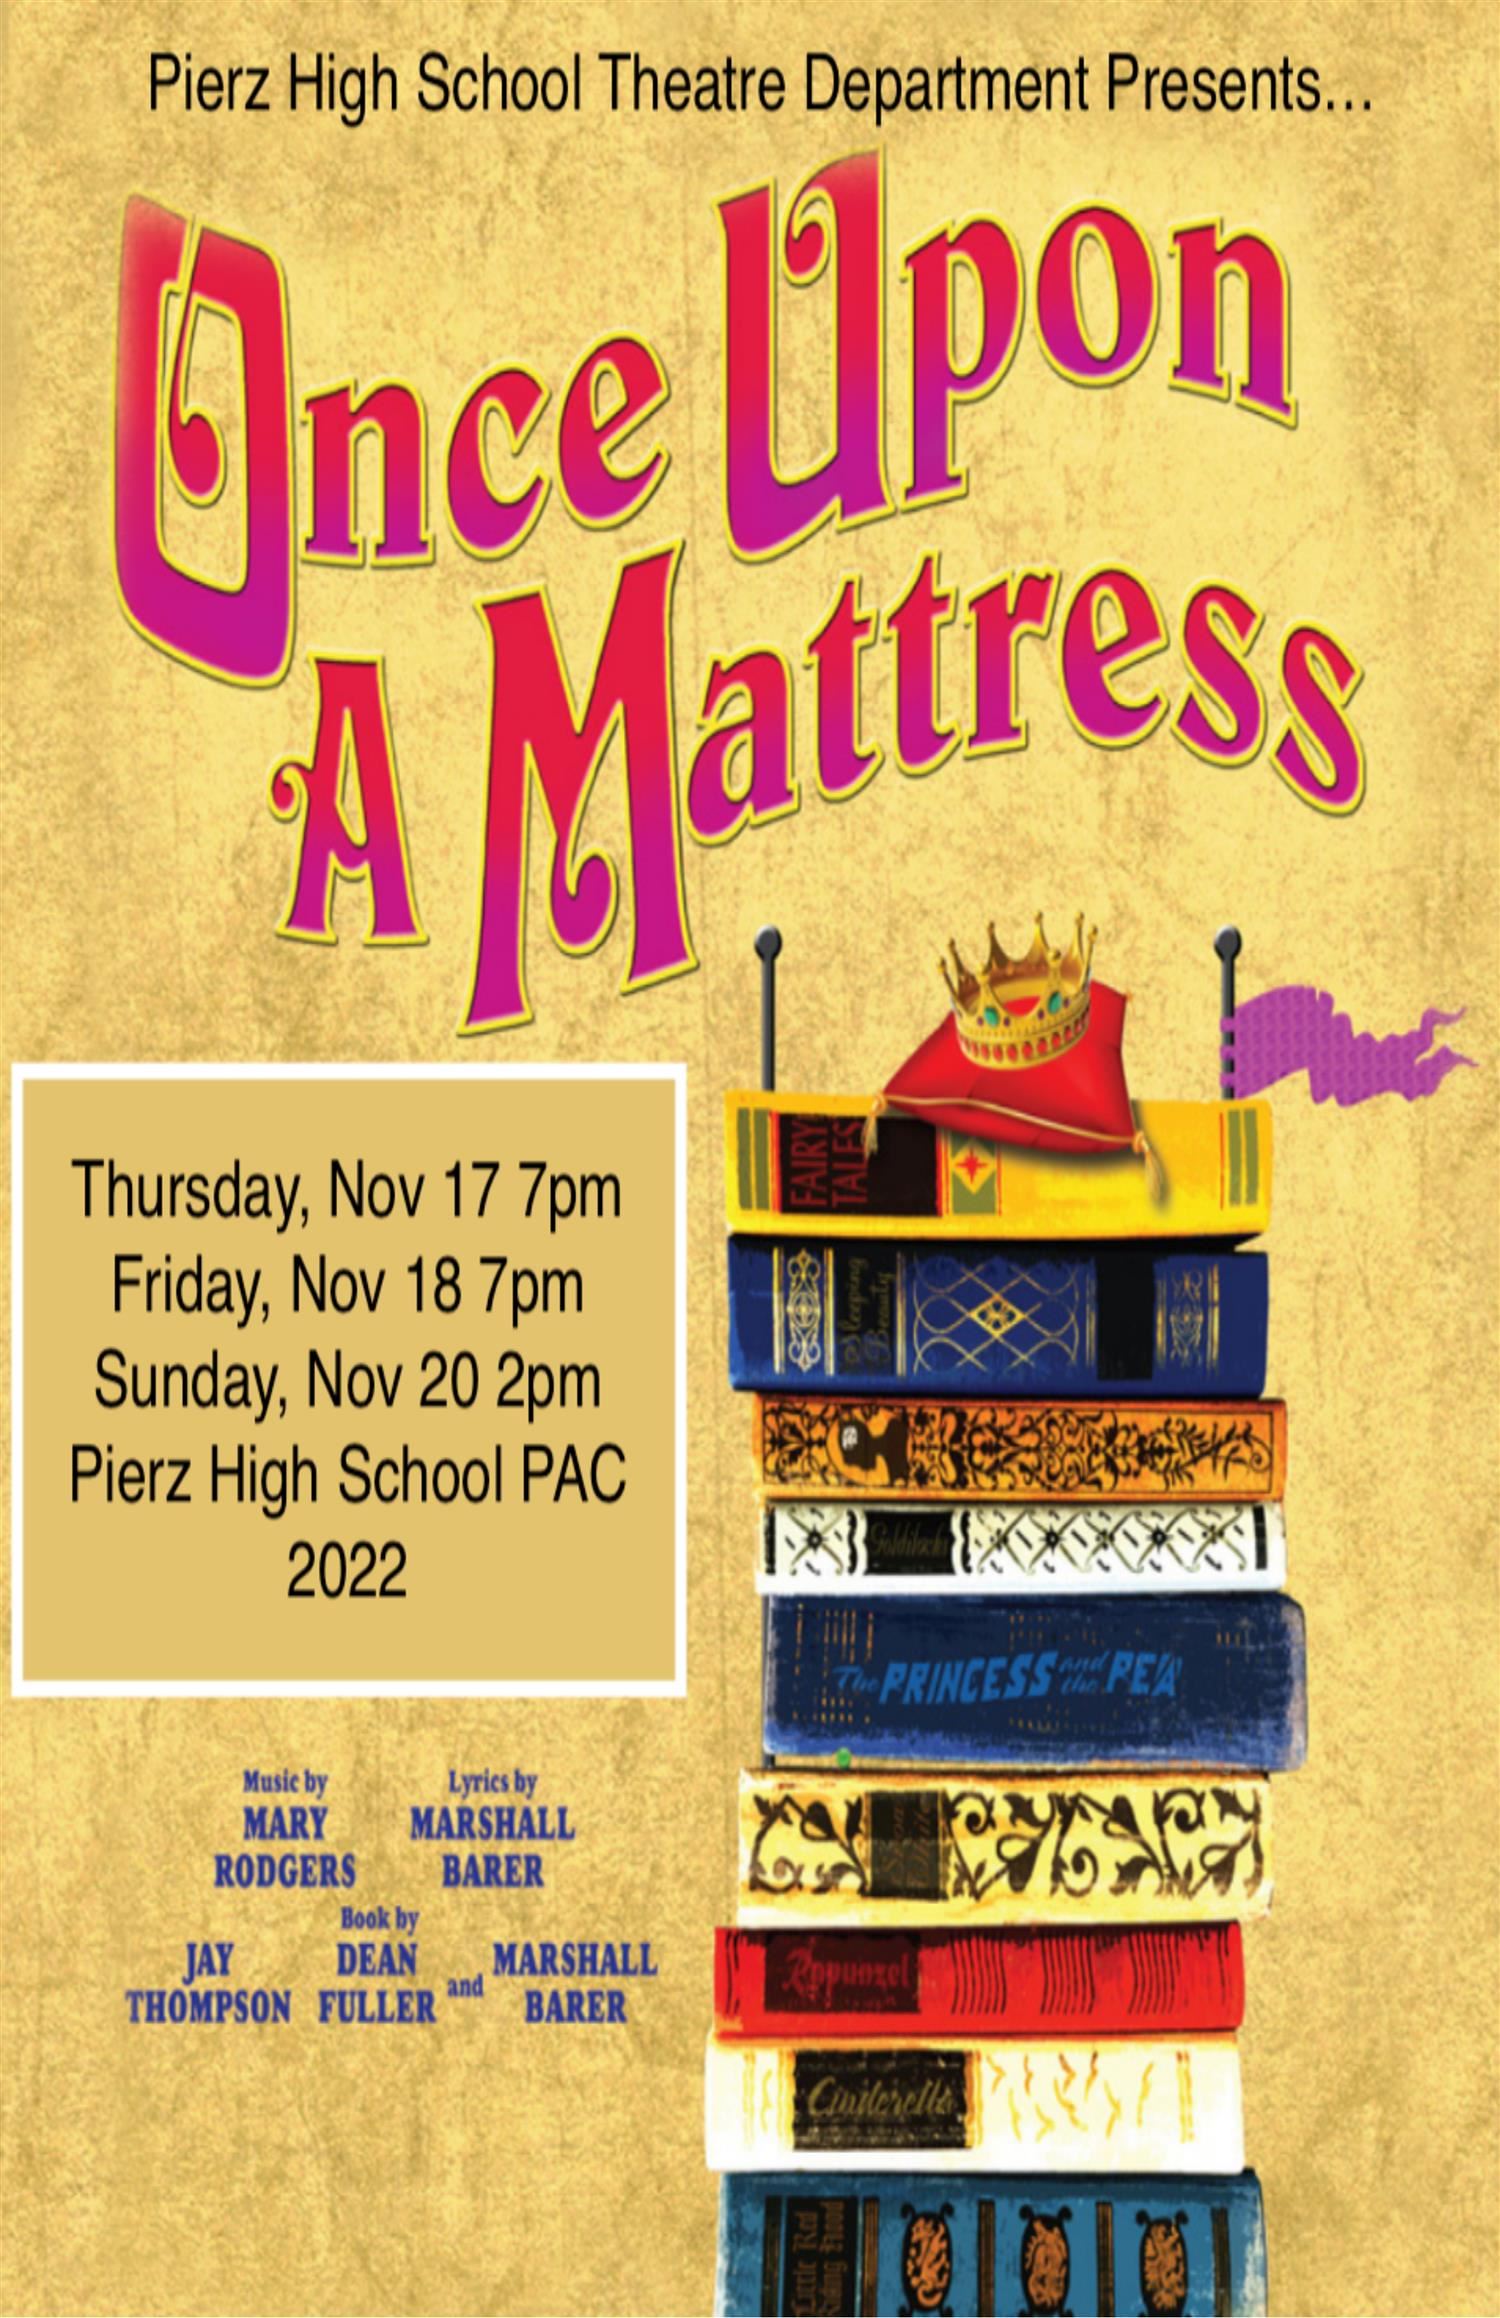 Once upon a mattress information flyer